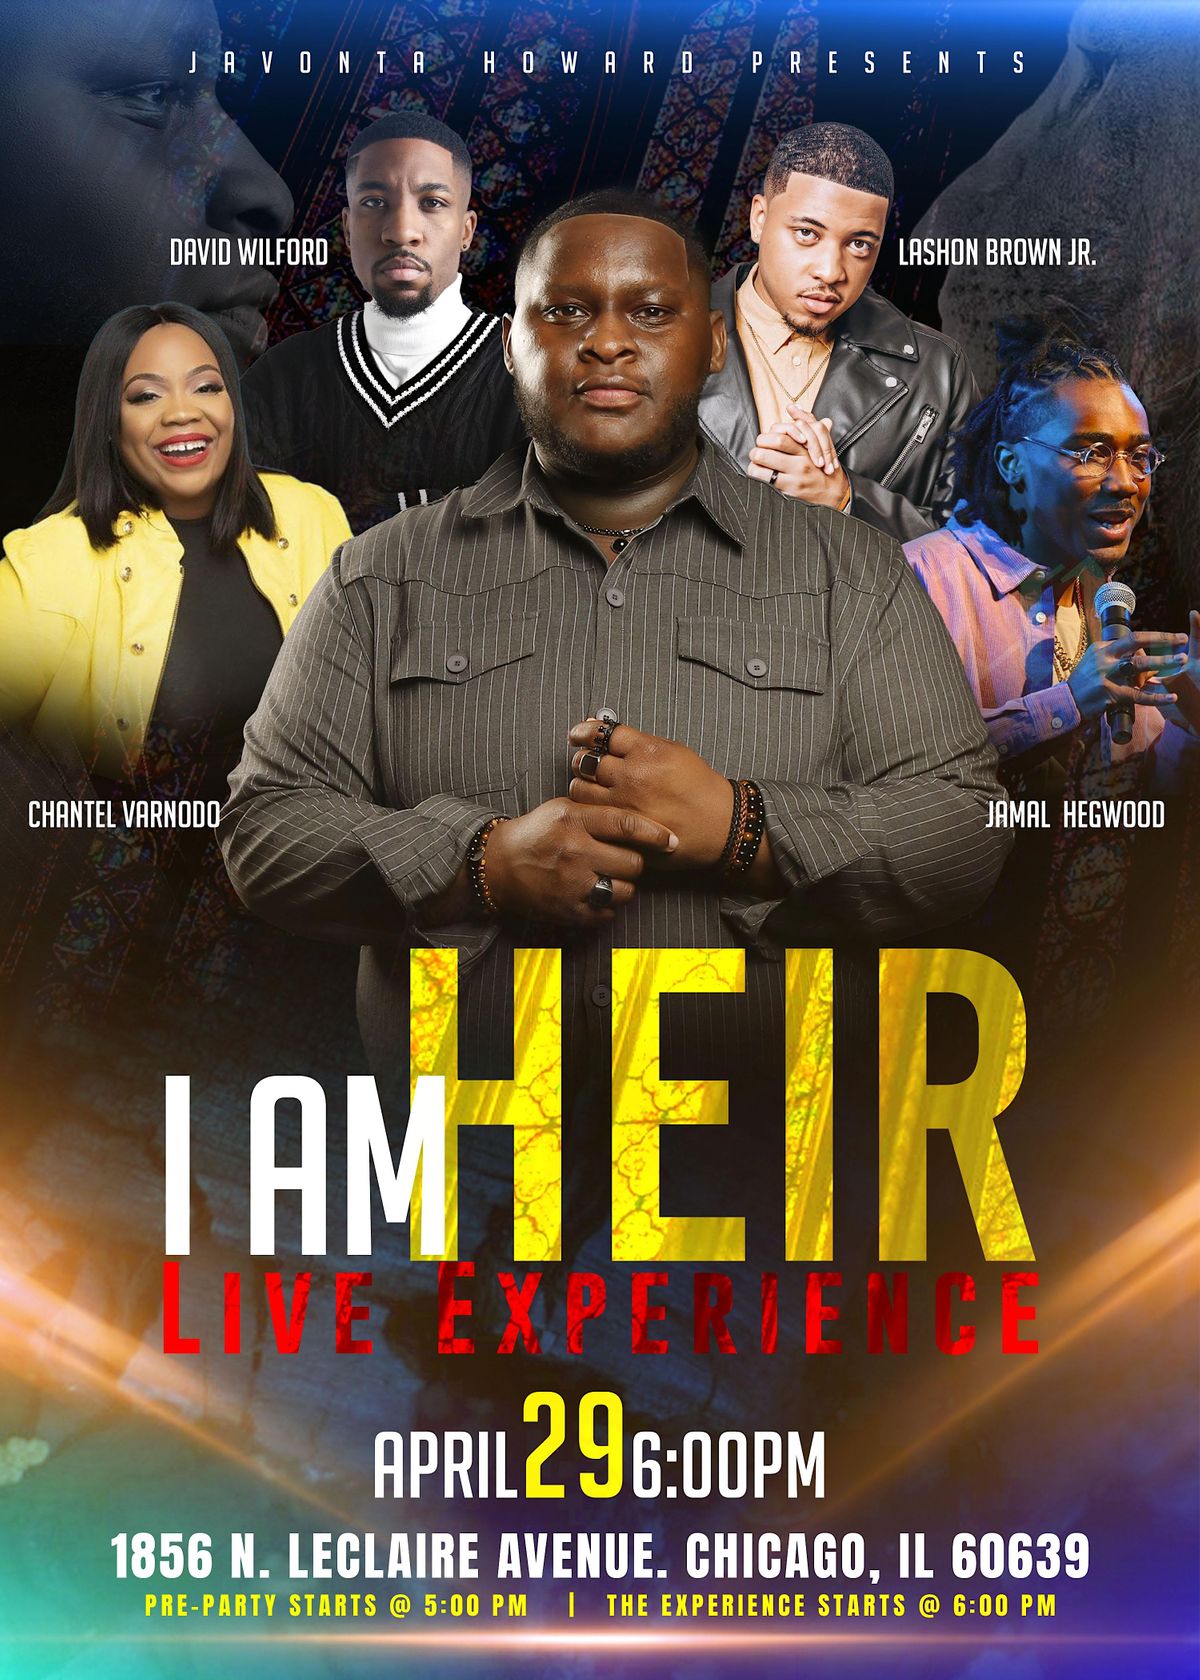 The "I AM HEIR" Live Experience: Easter Edition